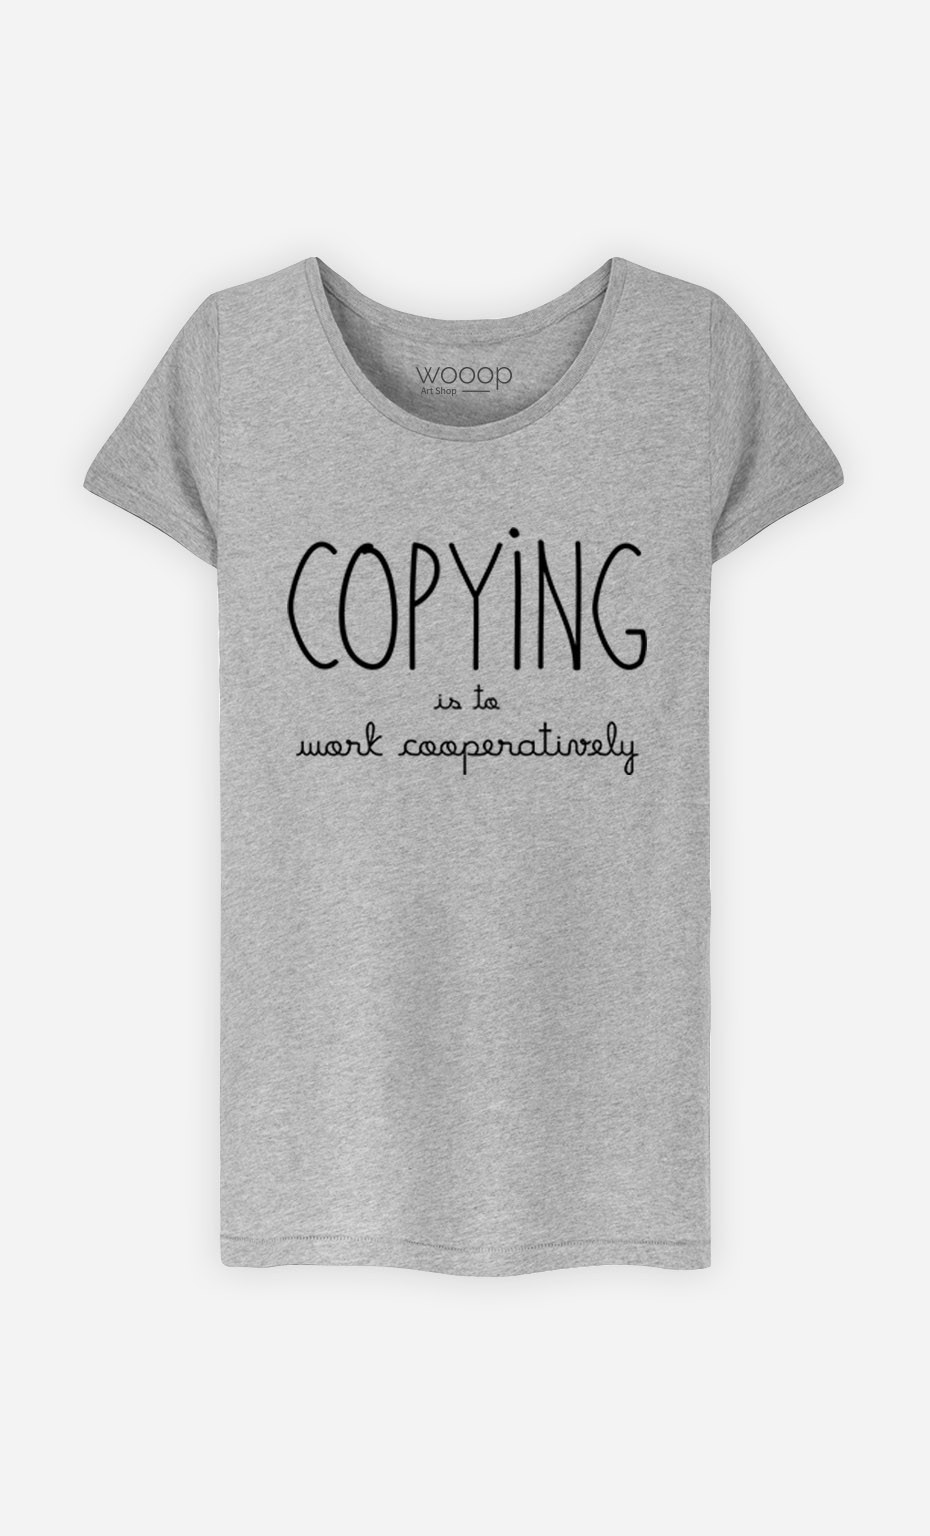 T-Shirt Copying is to Work Cooperatively